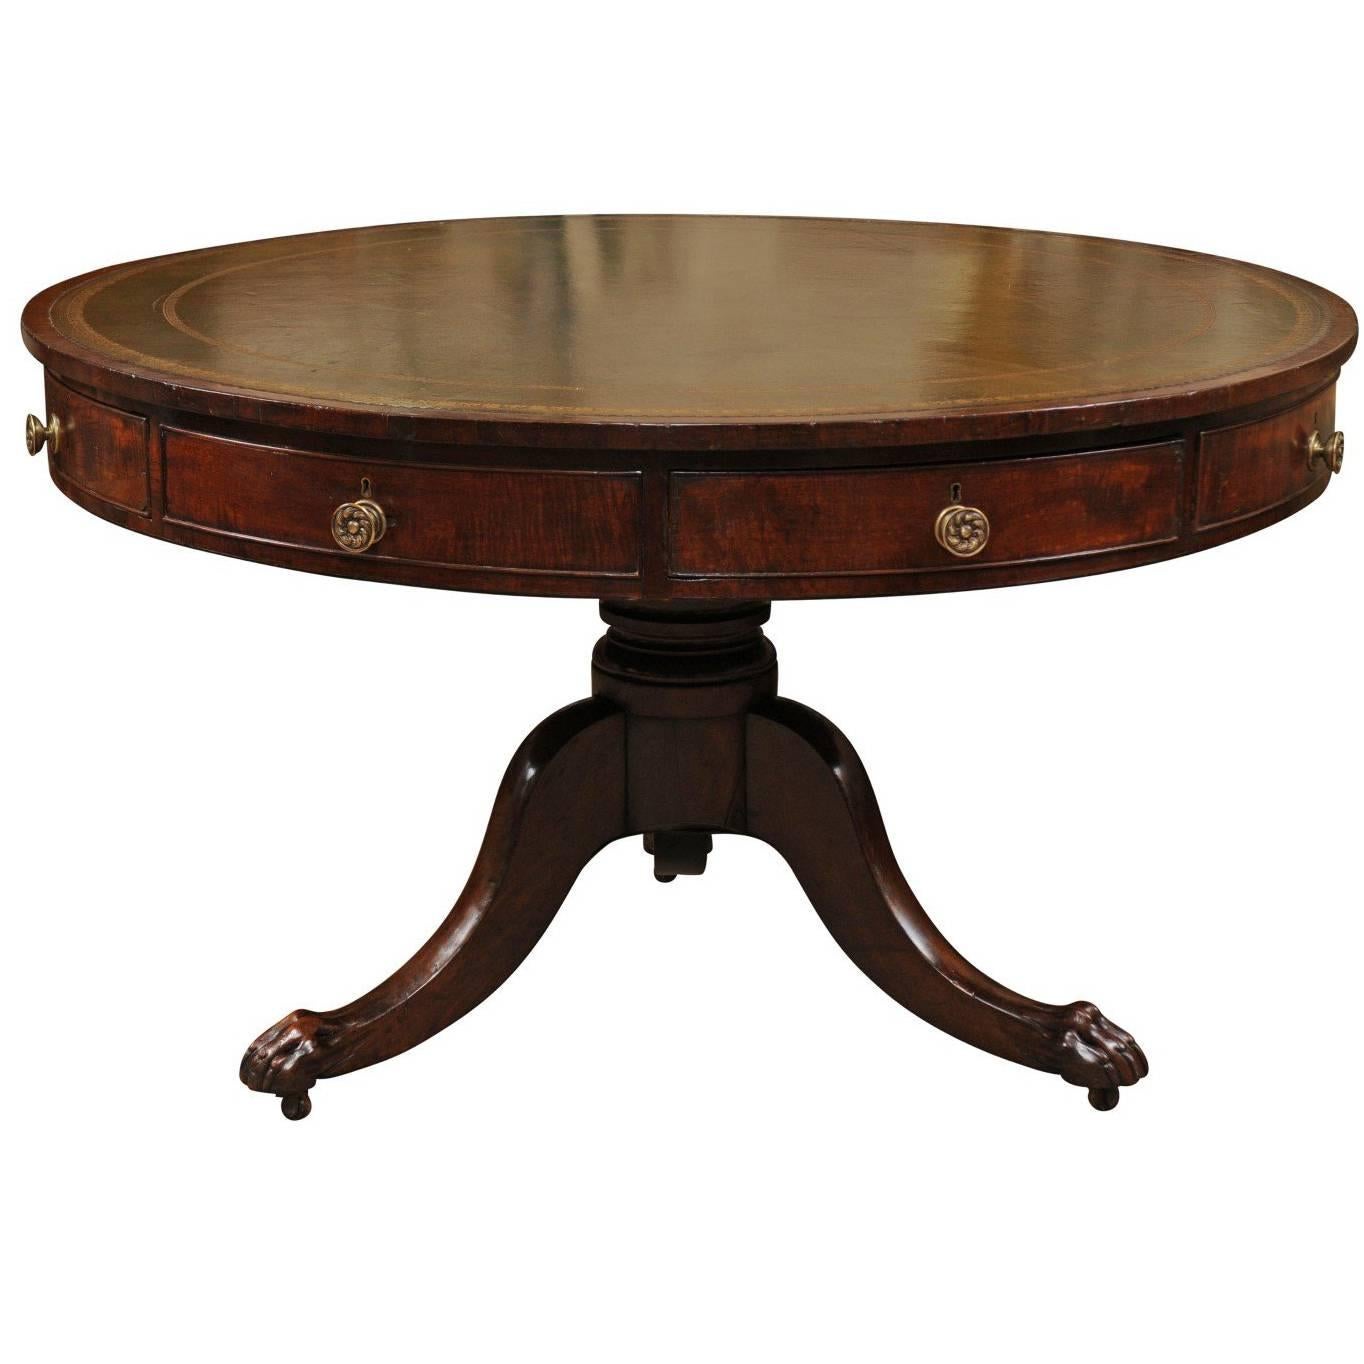 19th Century English Regency Style Rent Table with Green Leather Top & Paw Feet